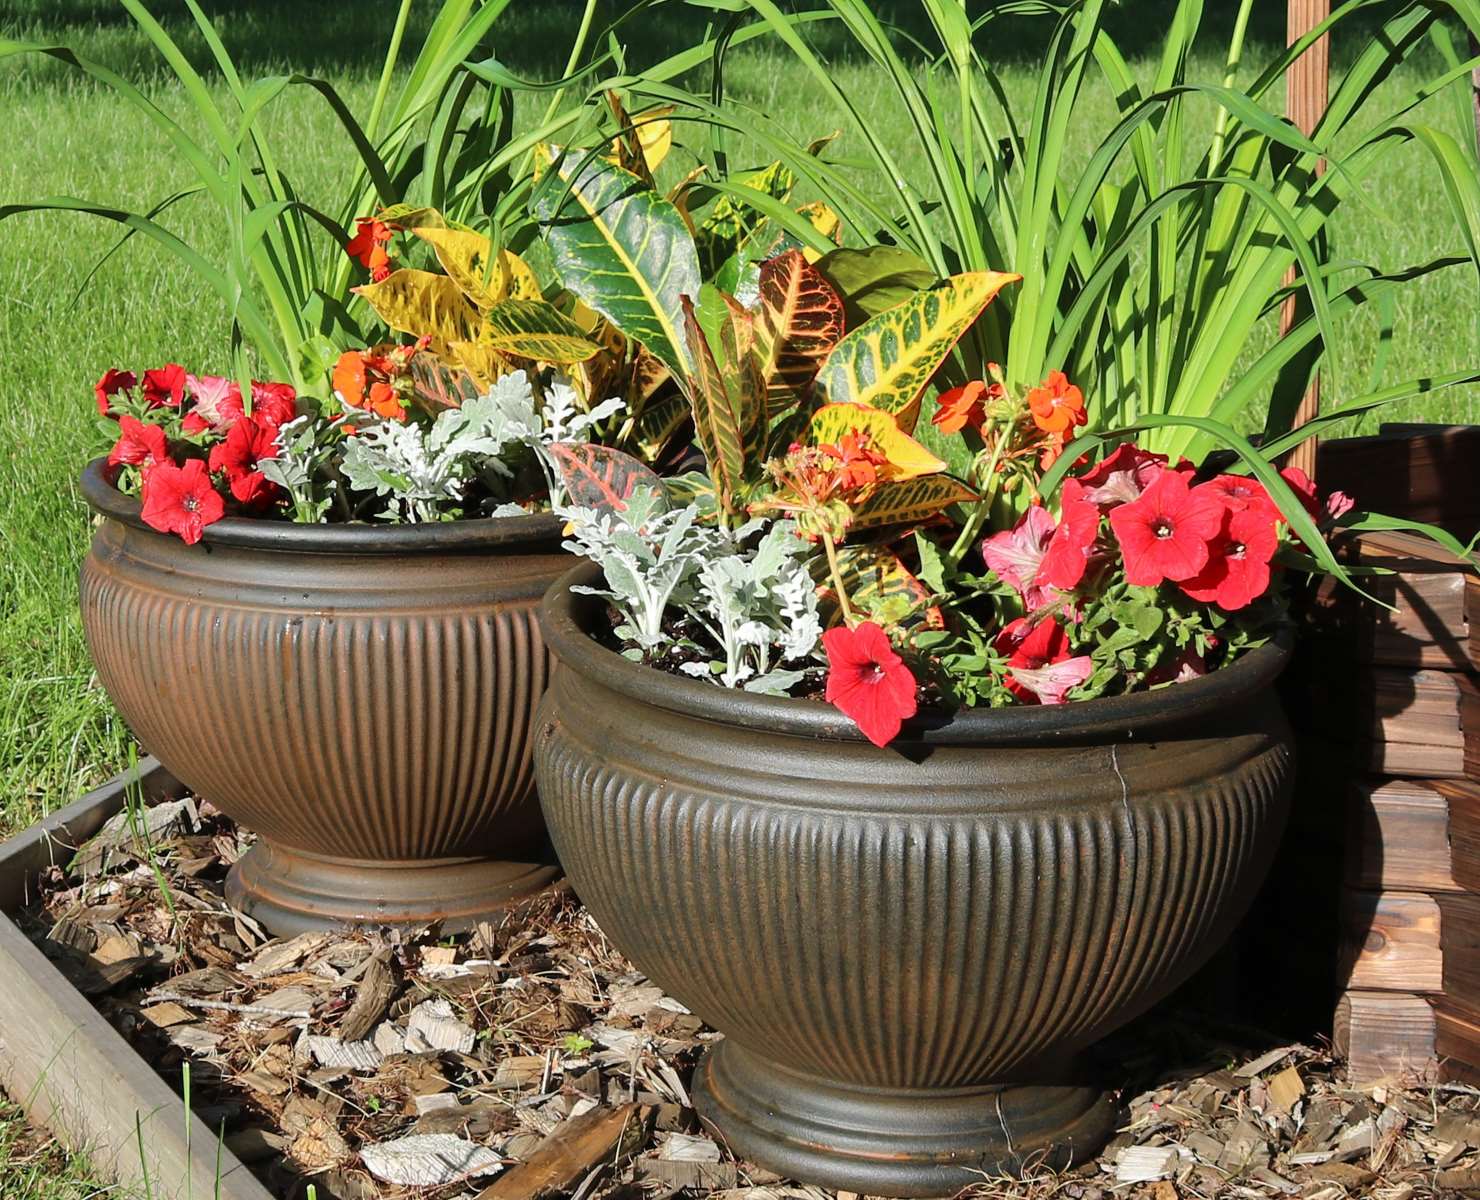 How To Drill Drainage Holes In An Urn Planter